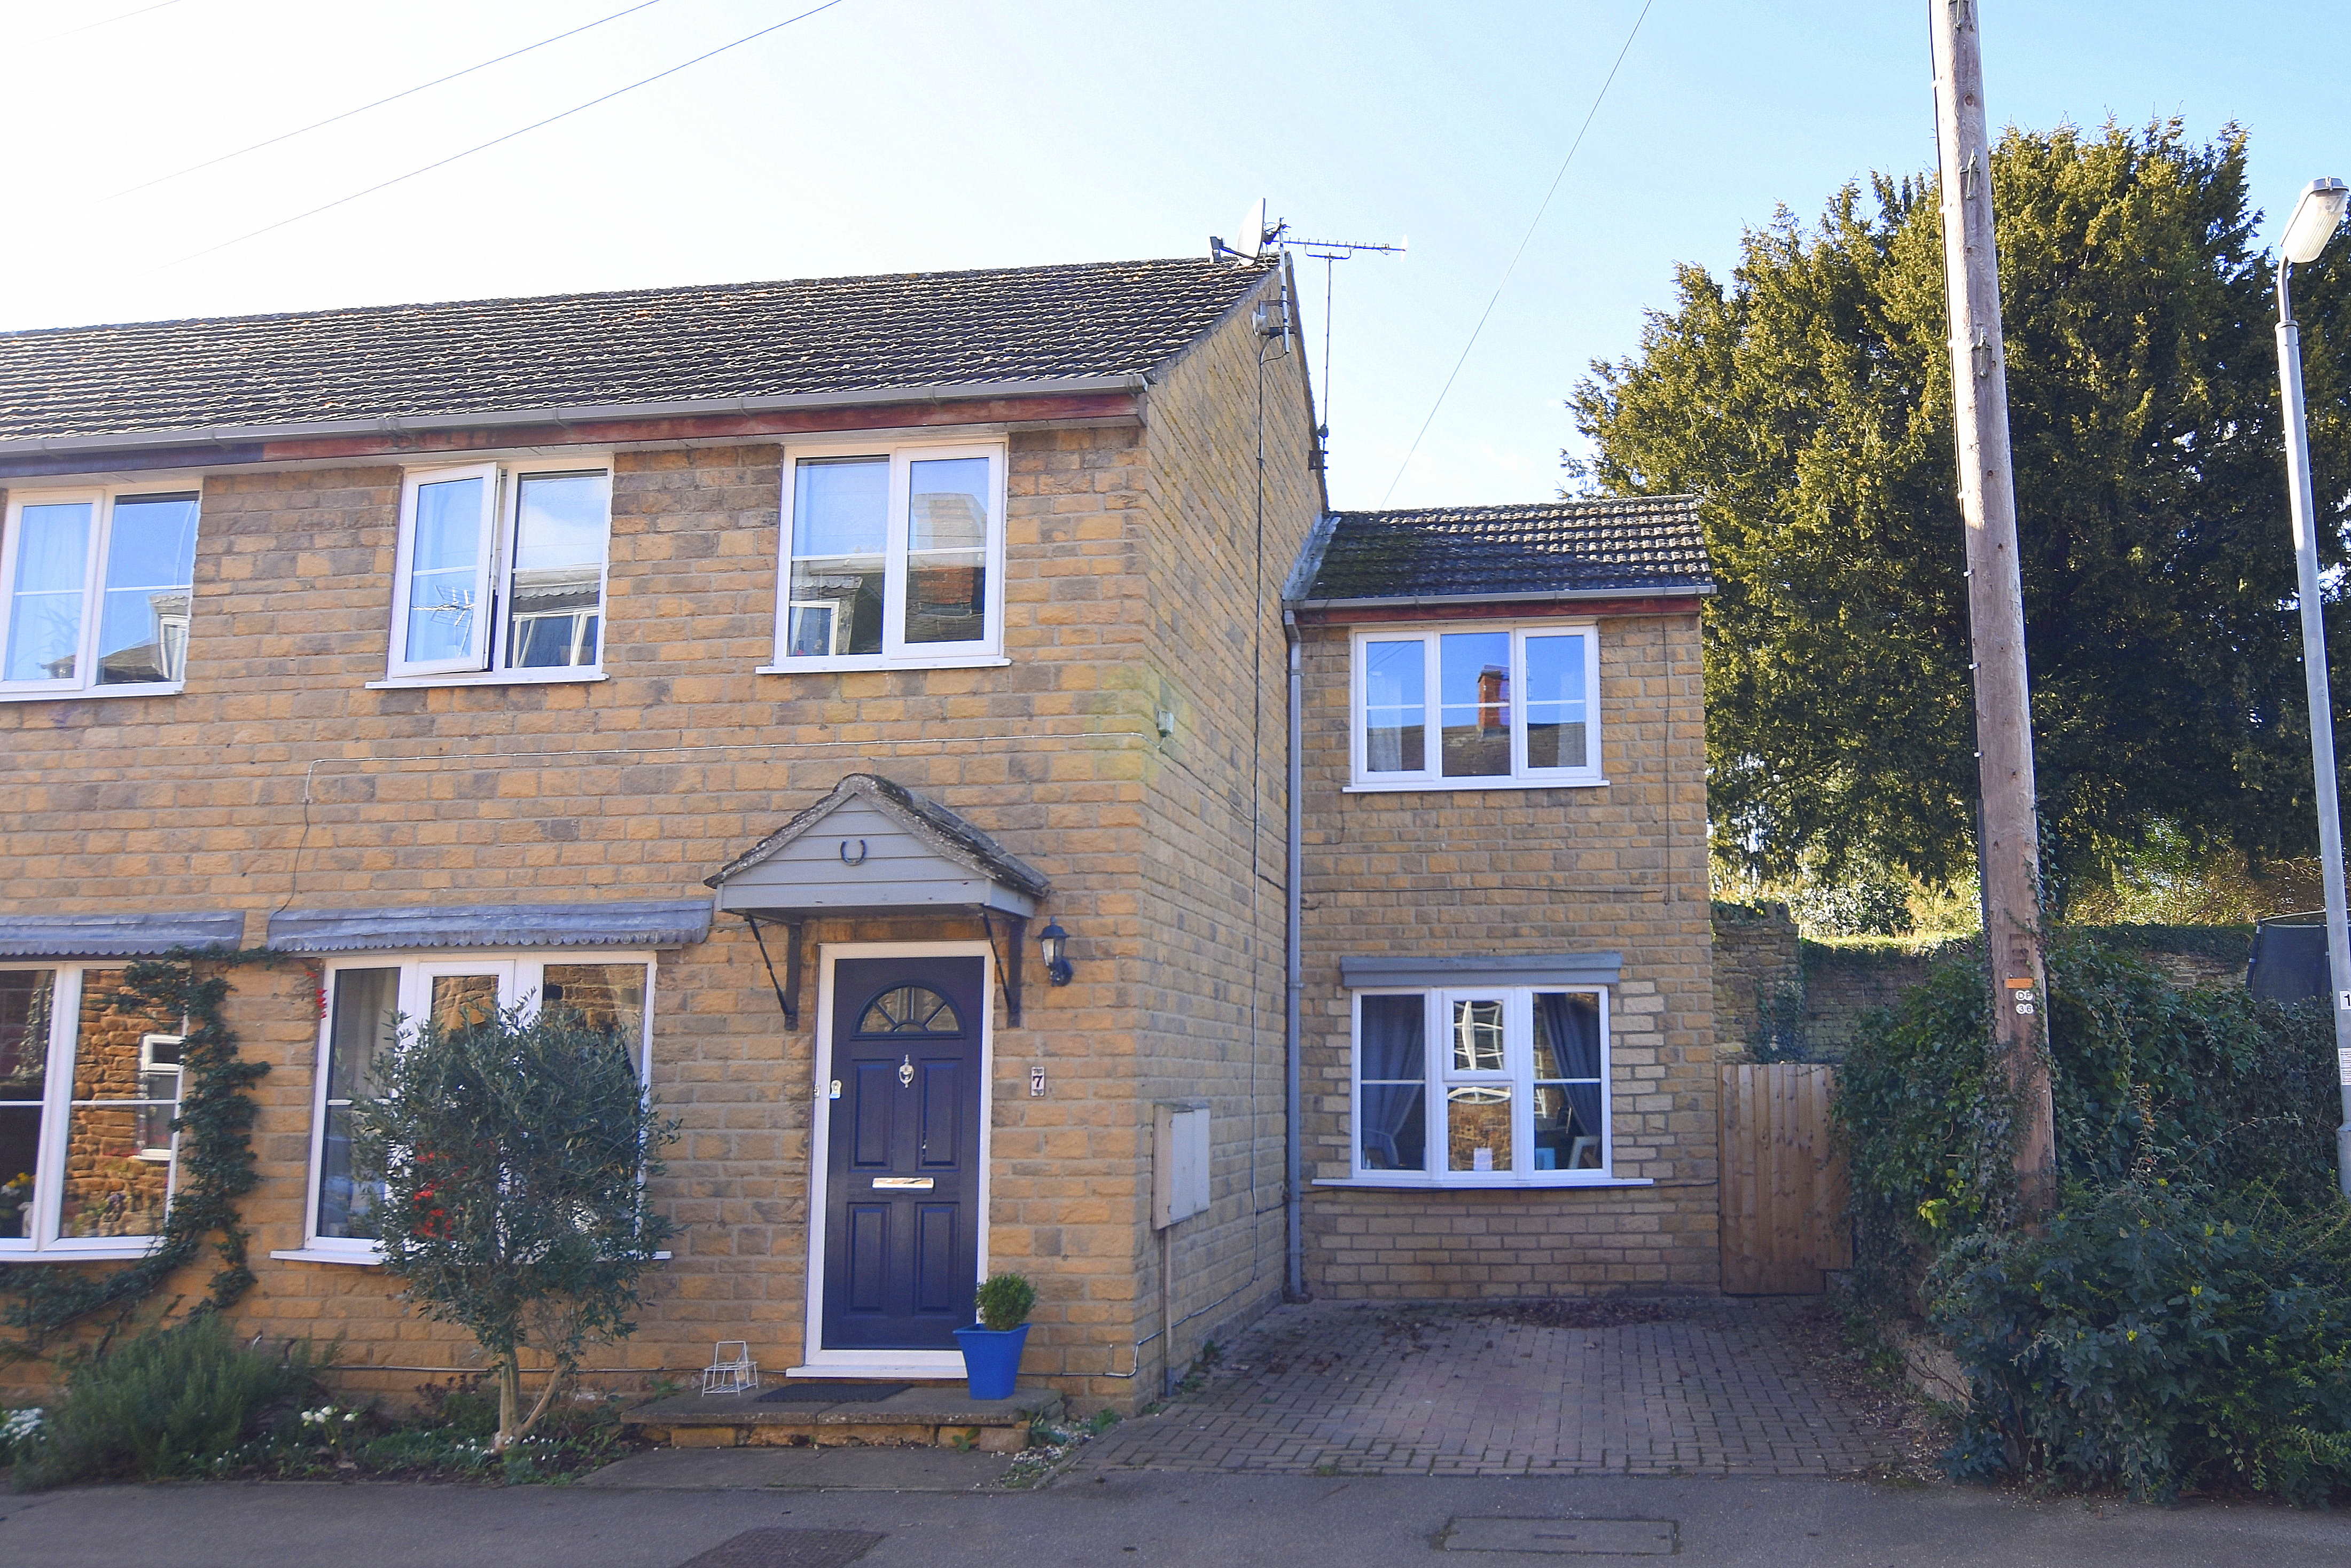 3 bed  for sale in Queen Street, Middleton Cheney 0